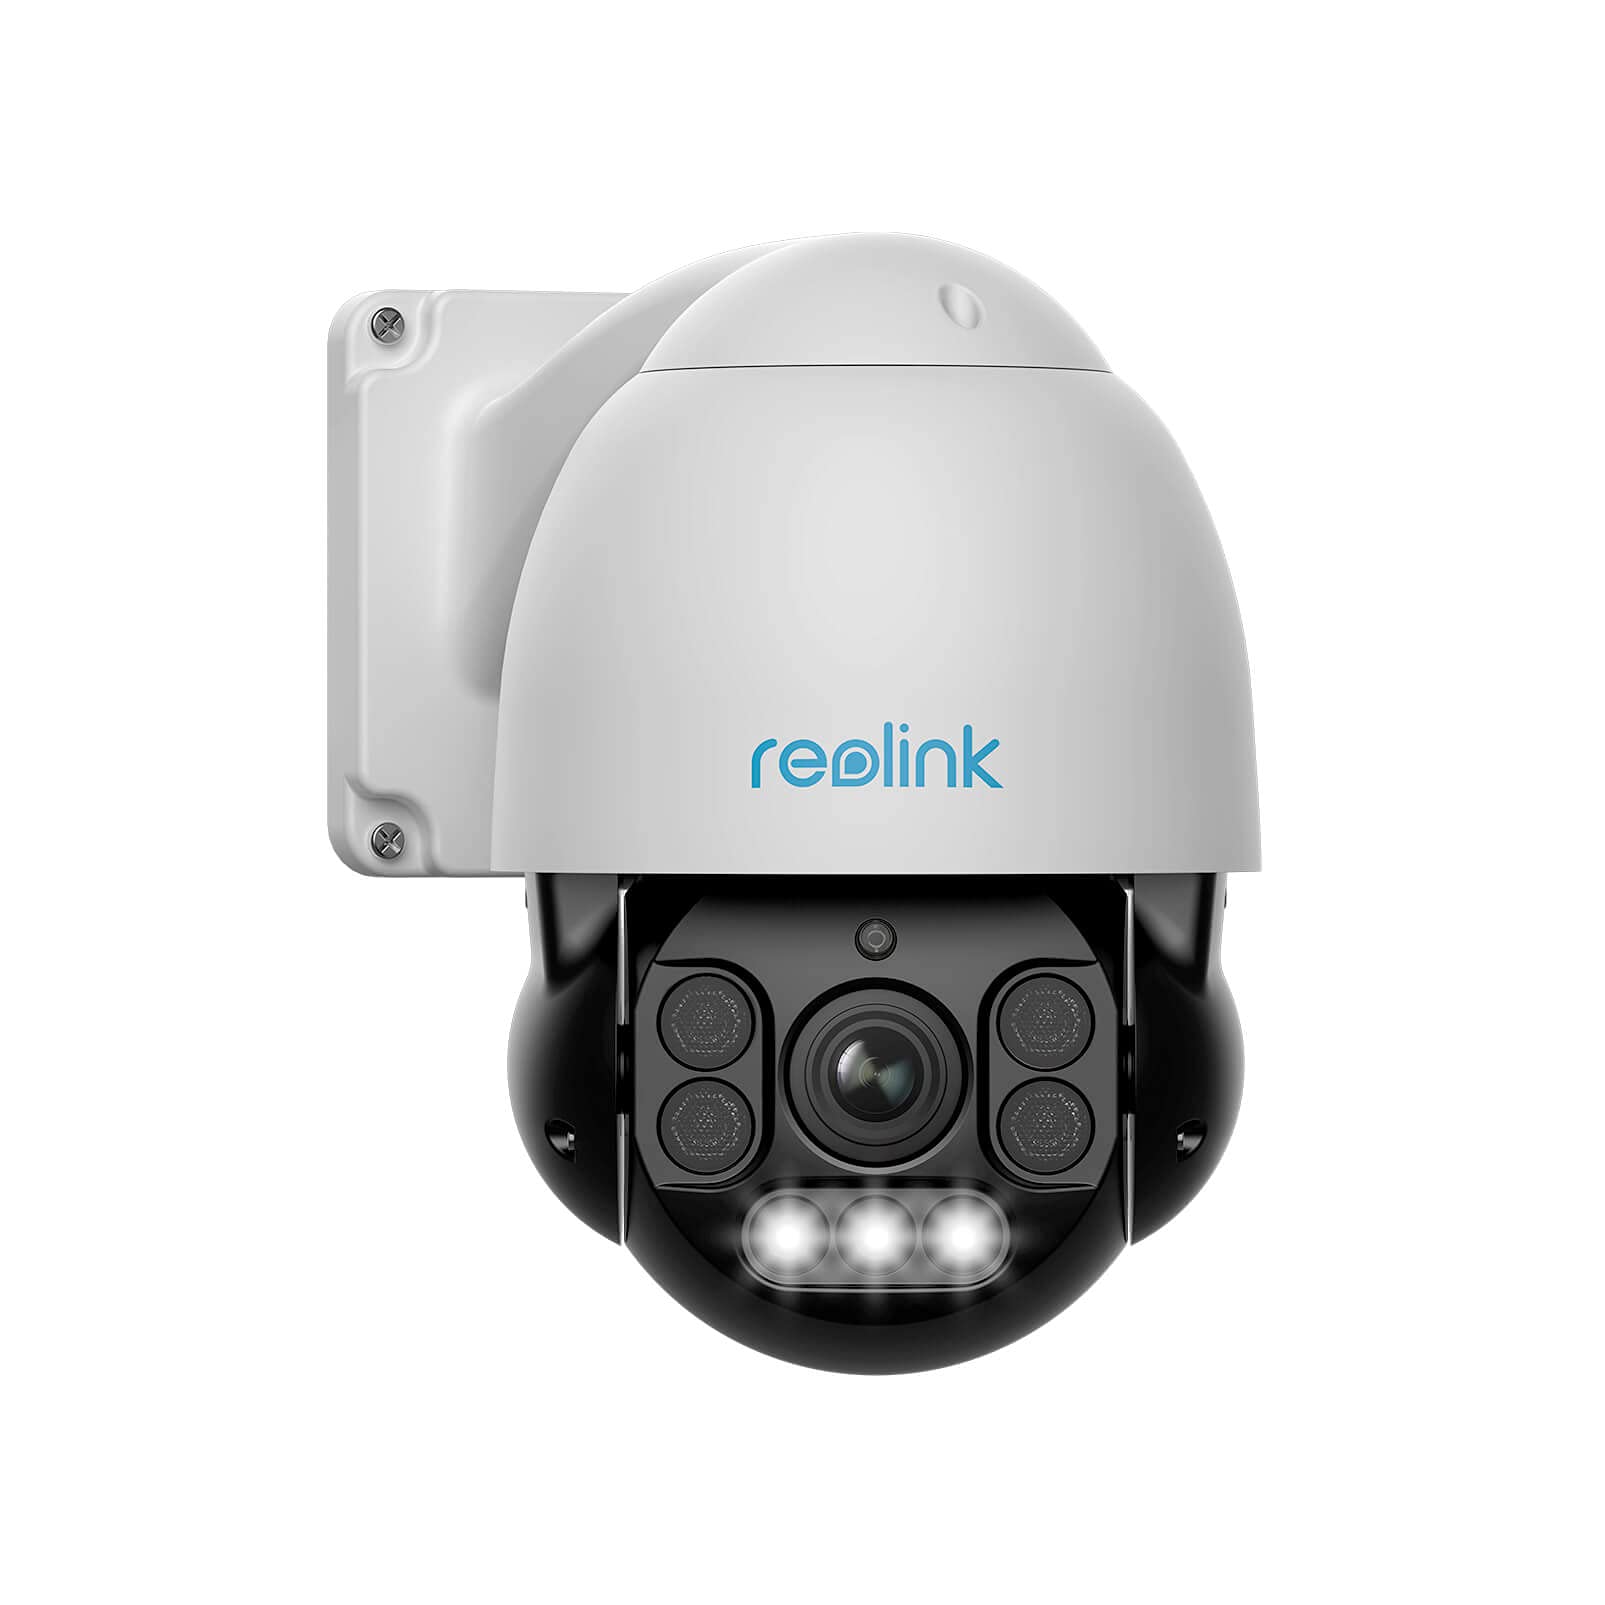 Reolink 4K PTZ PoE Security Camera Outdoor with Spotlights, Person/Vehicle Detection, 5X Optical Zoom, 360° Pan 90° Tilt, 190ft Color Night Vision, Auto Tracking, Two-Way Audio, Time Lapse, RLC-823A